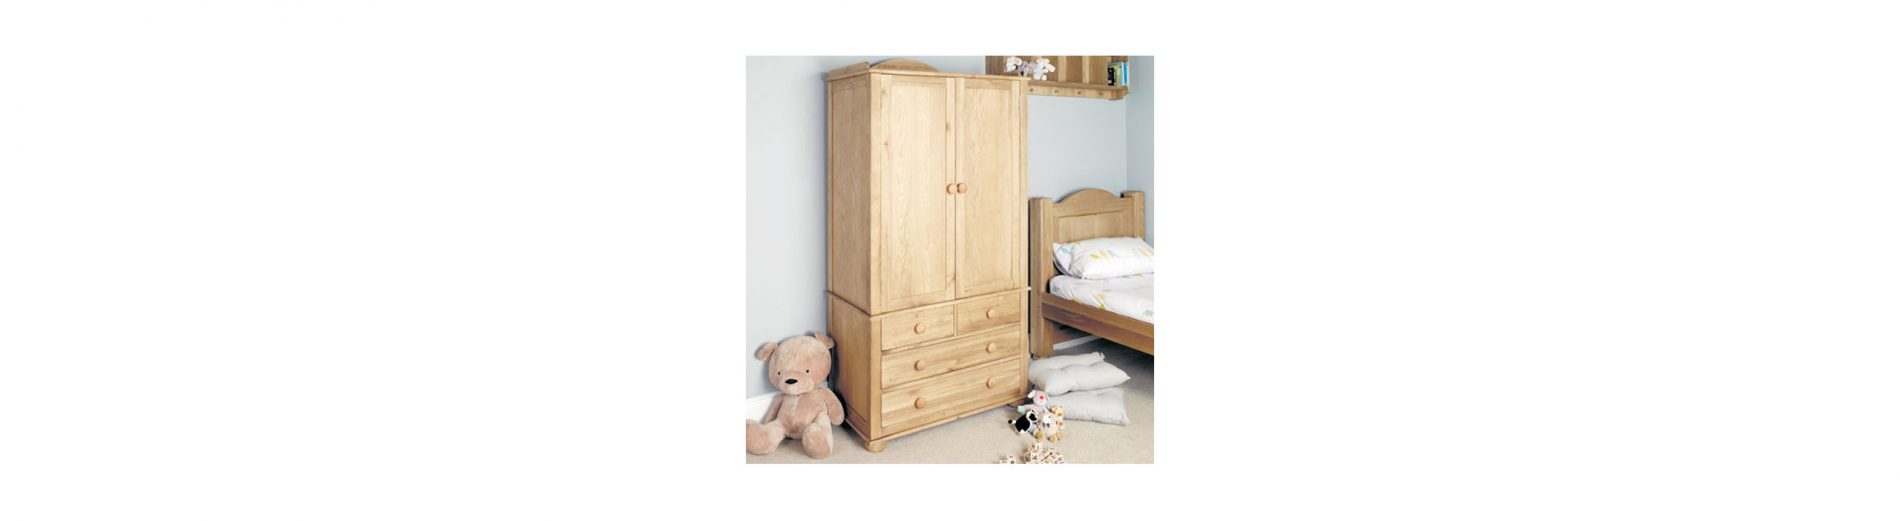 Quality Wooden Wardrobes